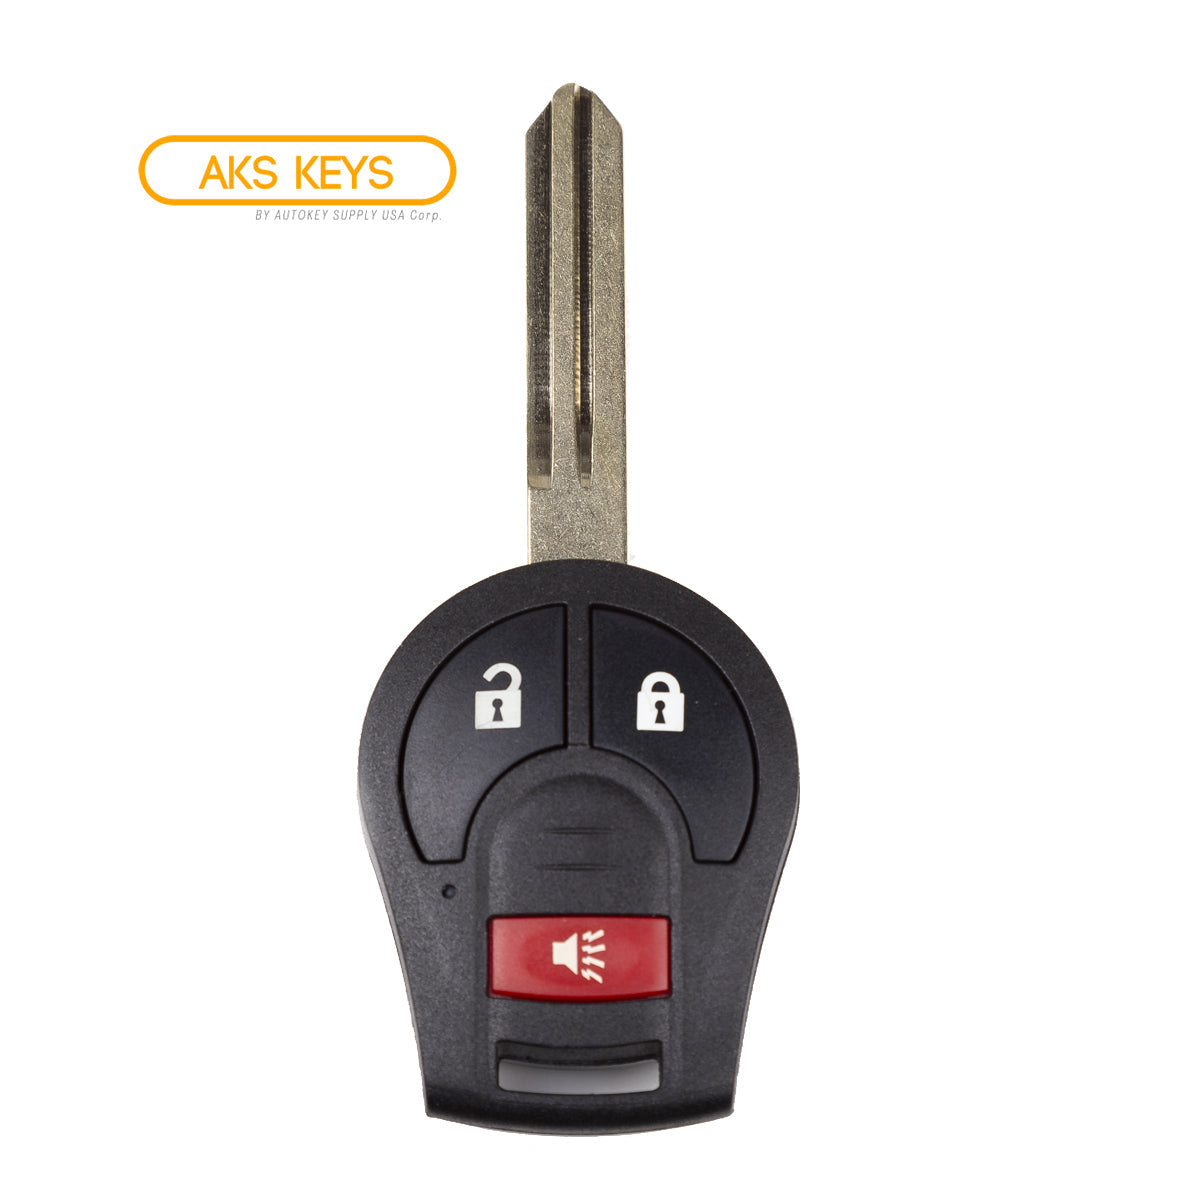 2009 Nissan Murano Key Fob Replacement - Aftermarket - 3 Buttons Fob FCC# CWTWB1U751